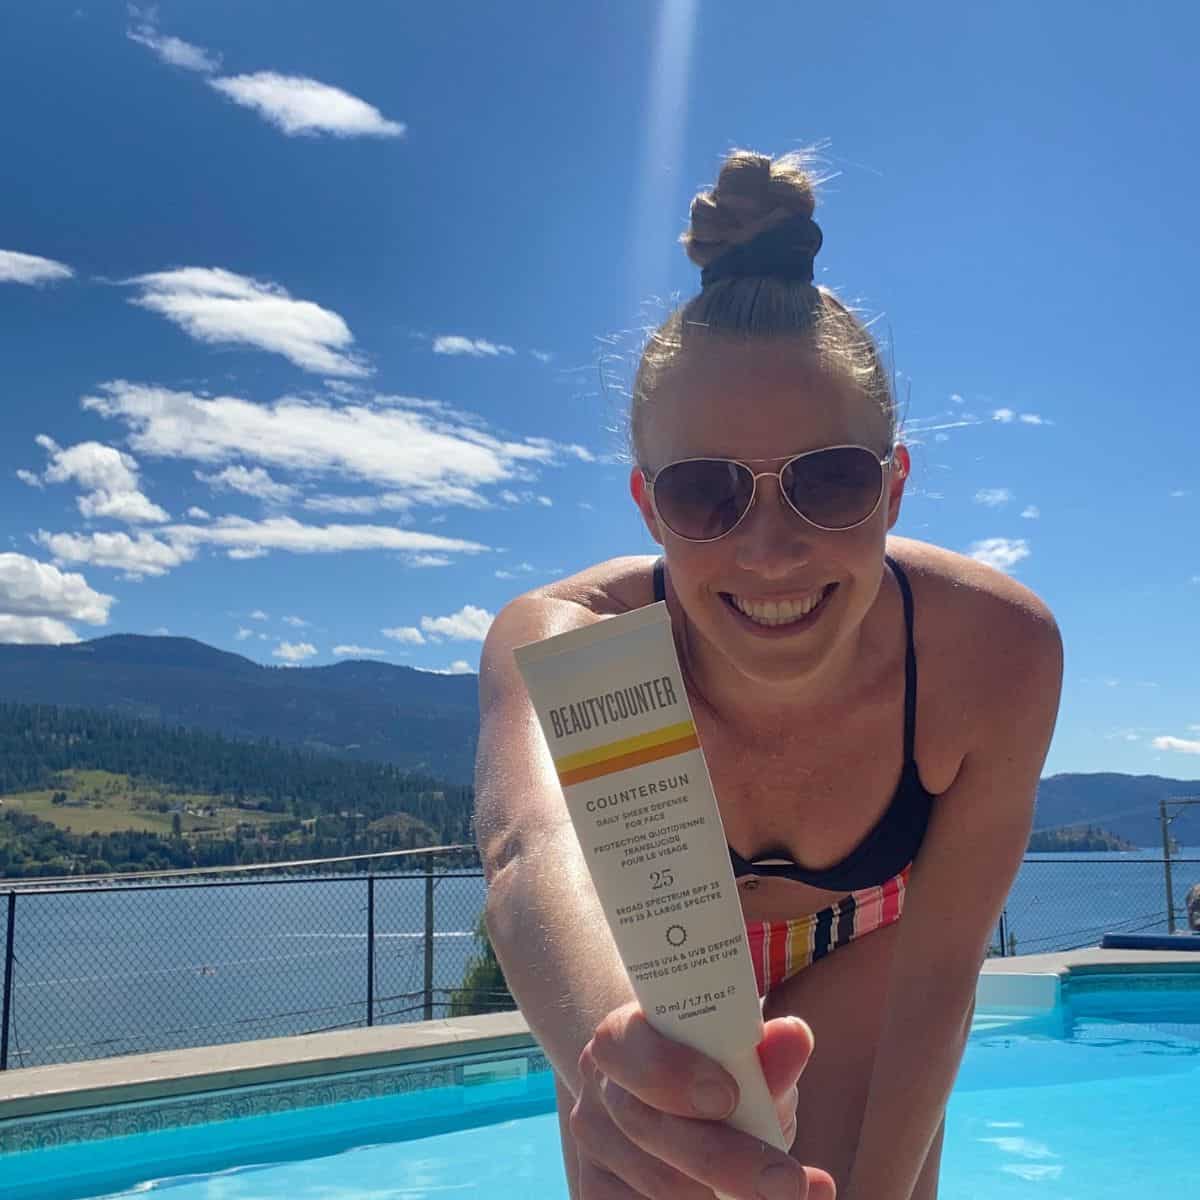 A girl in a bikini with a pool behind her holding a tube of Beautycounter sunscreen.